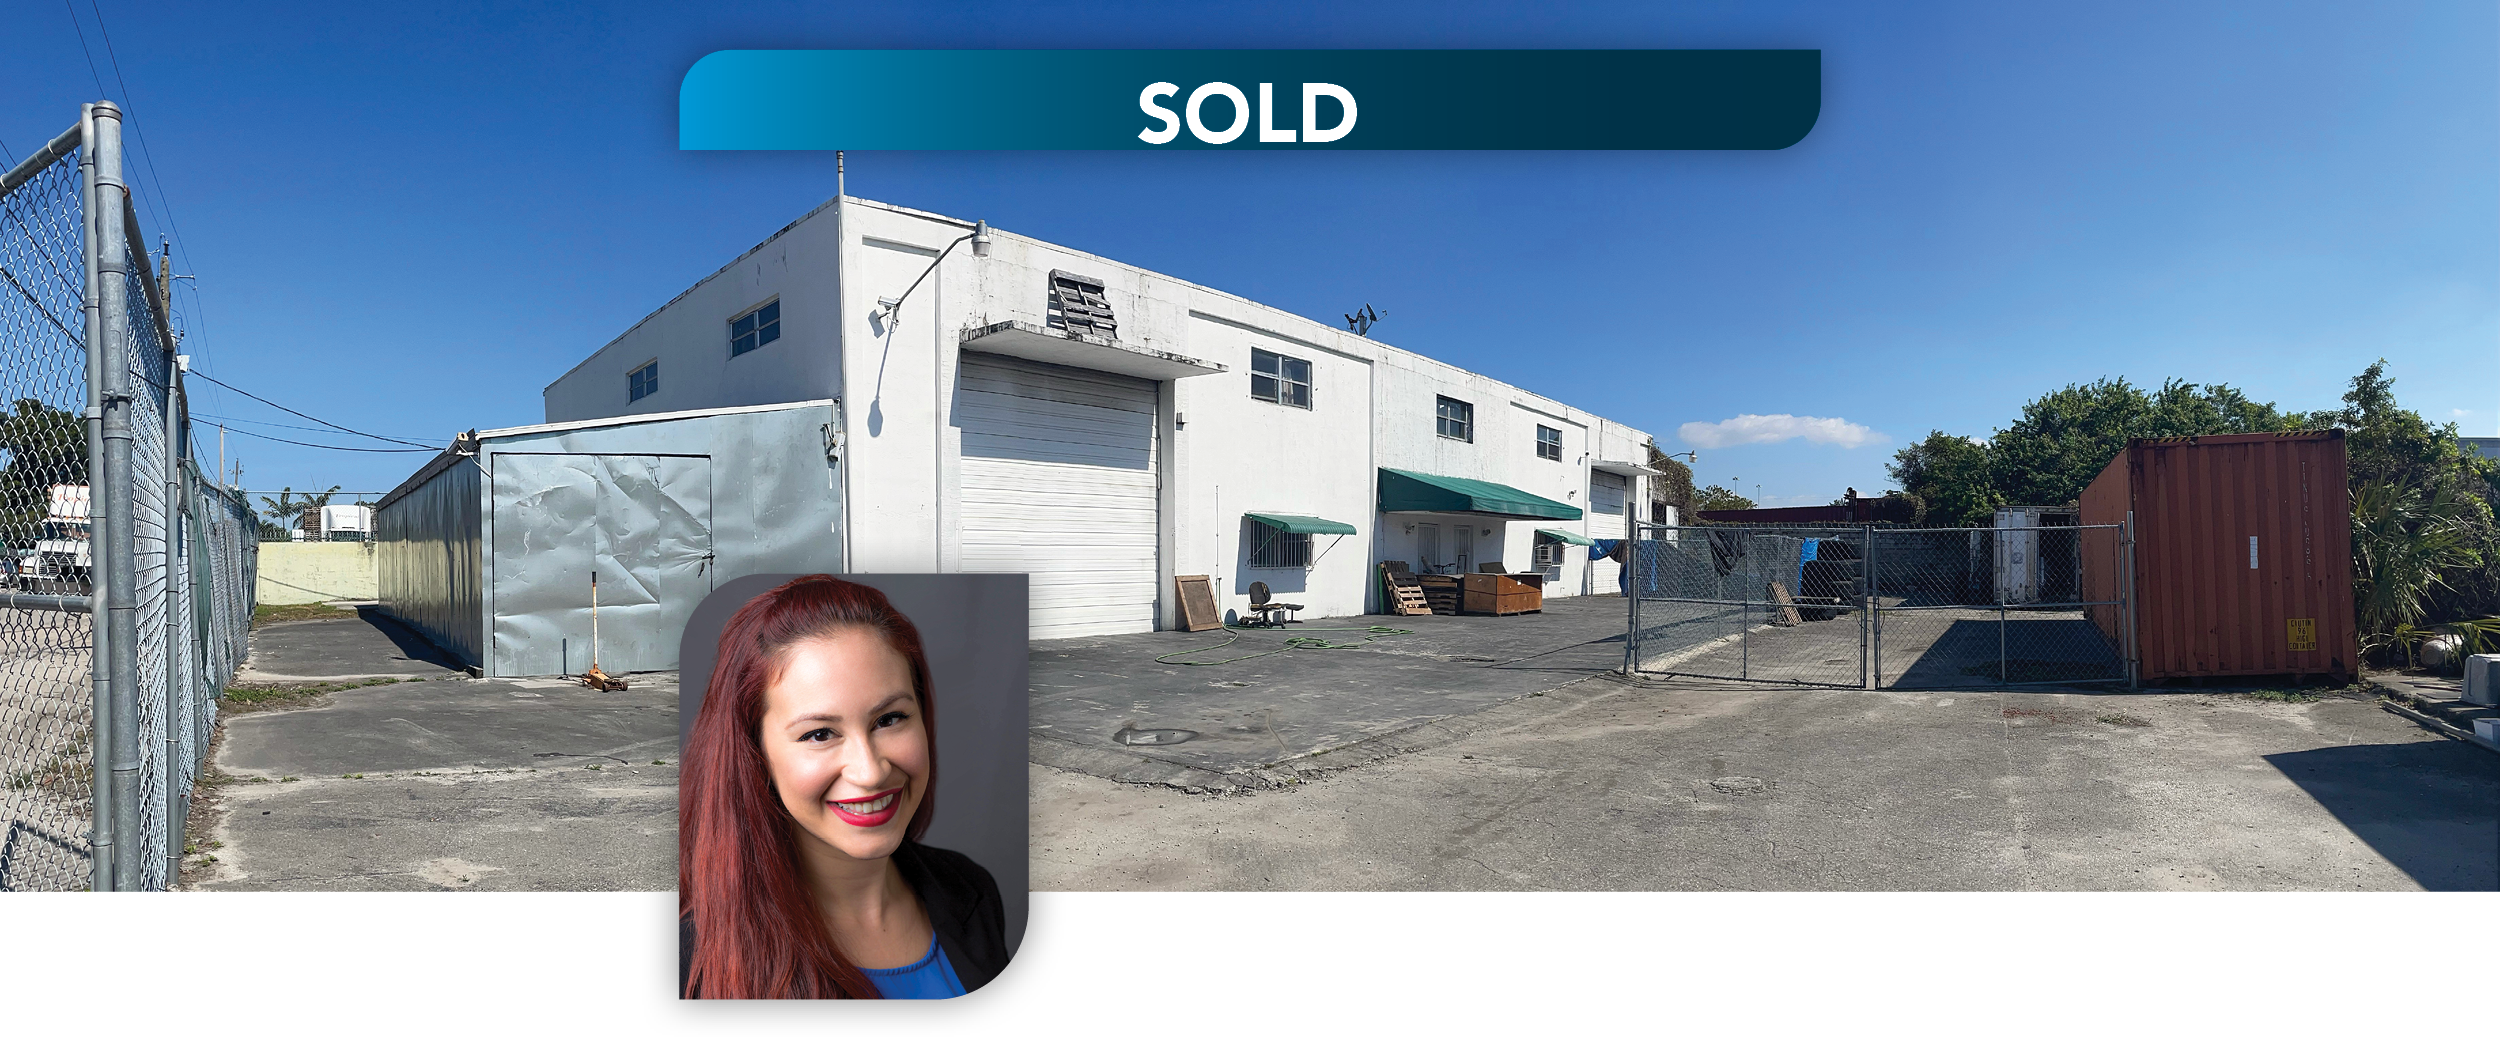 Lee & Associates South Florida Announces the Sale of Freestanding Miami Airport West Industrial Building at 6801 NW 73rd Ct